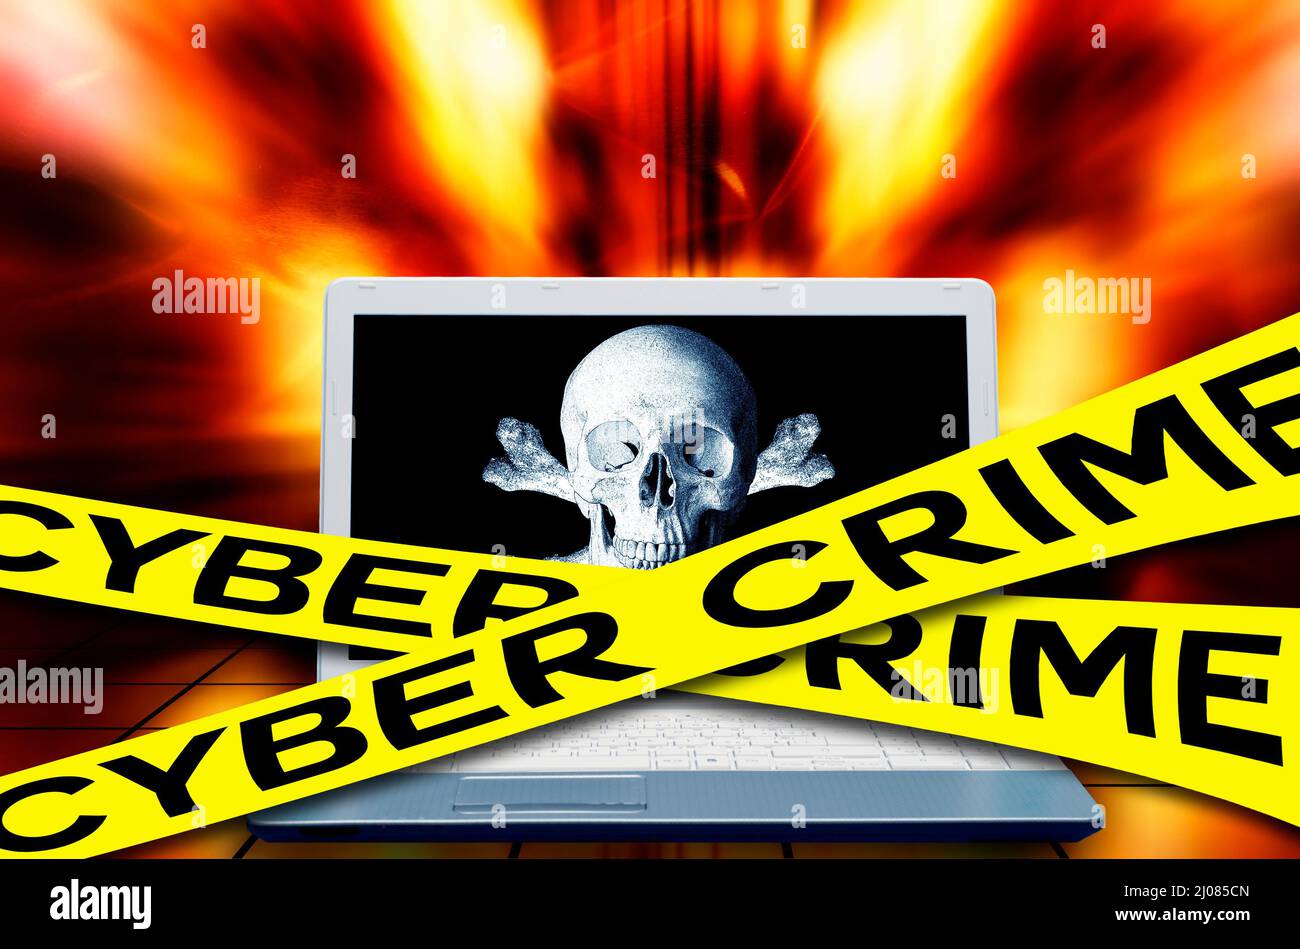 cybercrime and deadly cyber attack concept Stock Photo